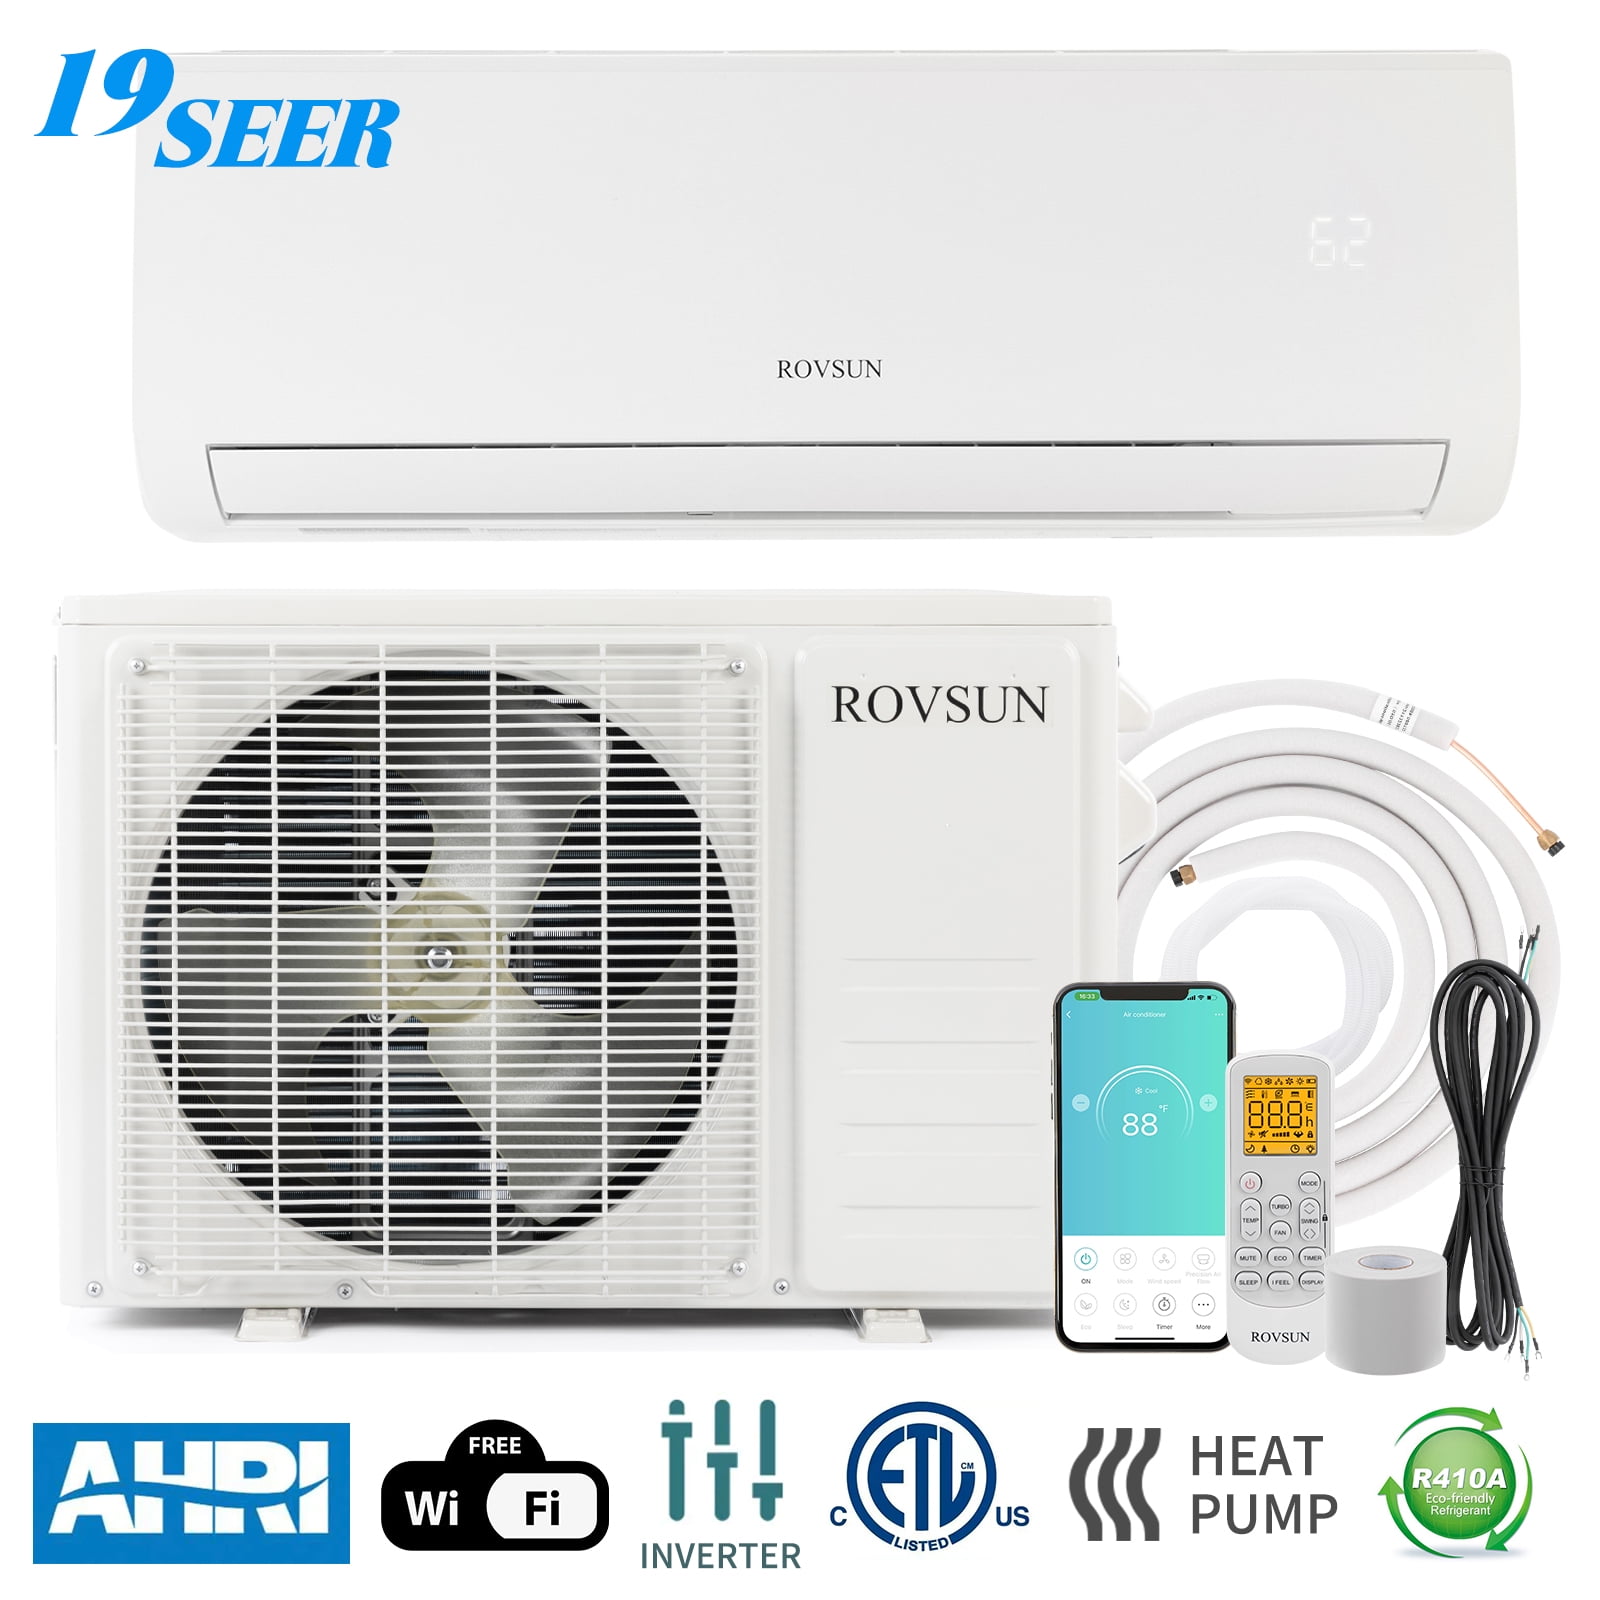 ROVSUN Wifi Enabled 18,000 BTU Mini Split AC/Heating System with Inverter, 19 SEER 230V Energy Saving Ductless Air Conditioner with Pre-Charged Pump & Installation Kit -